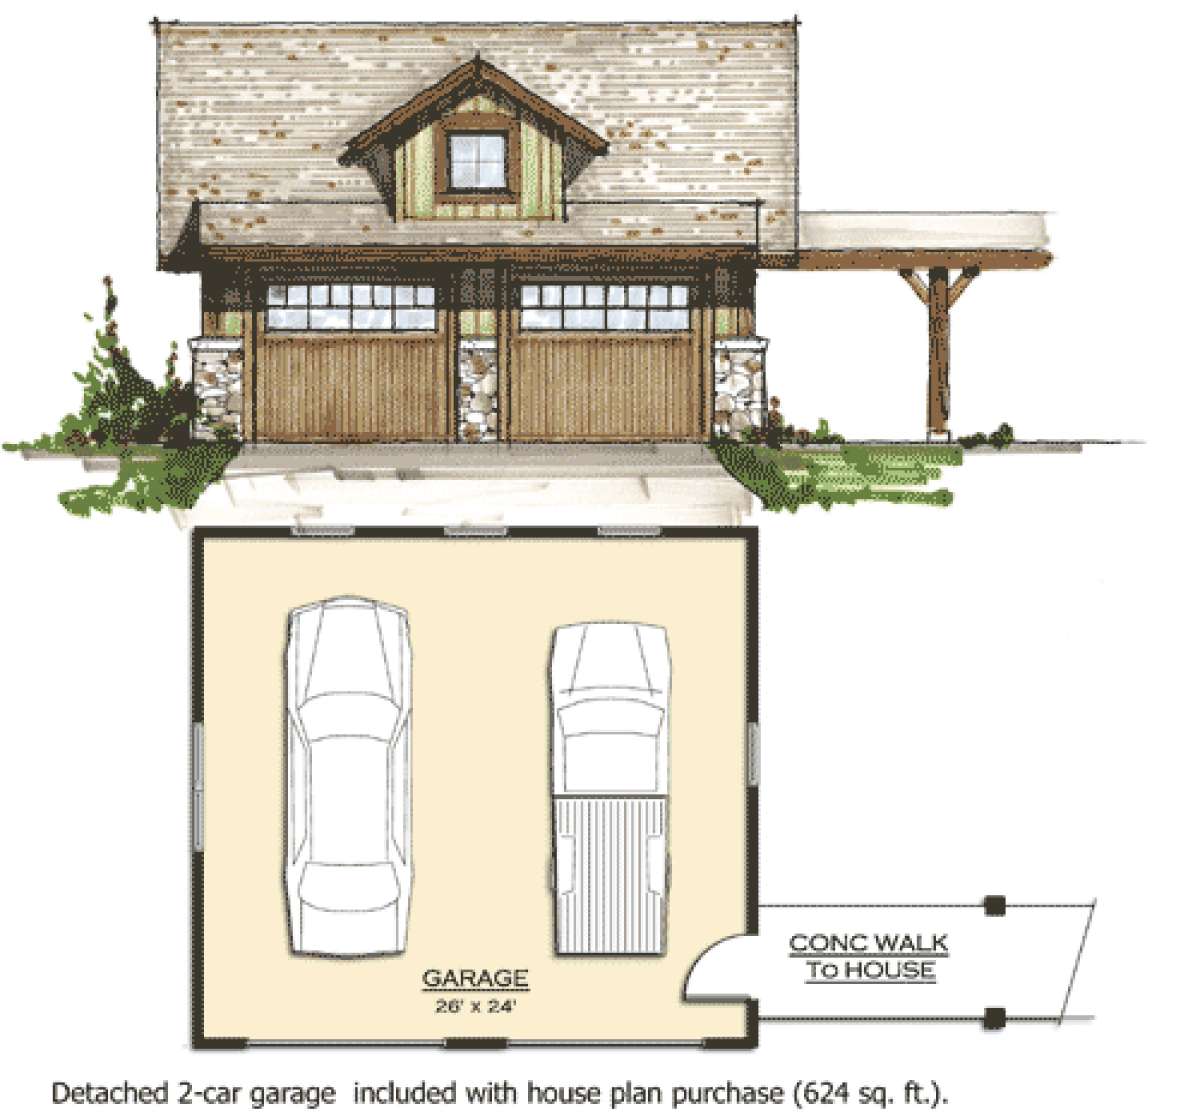 Garage for House Plan #8504-00024